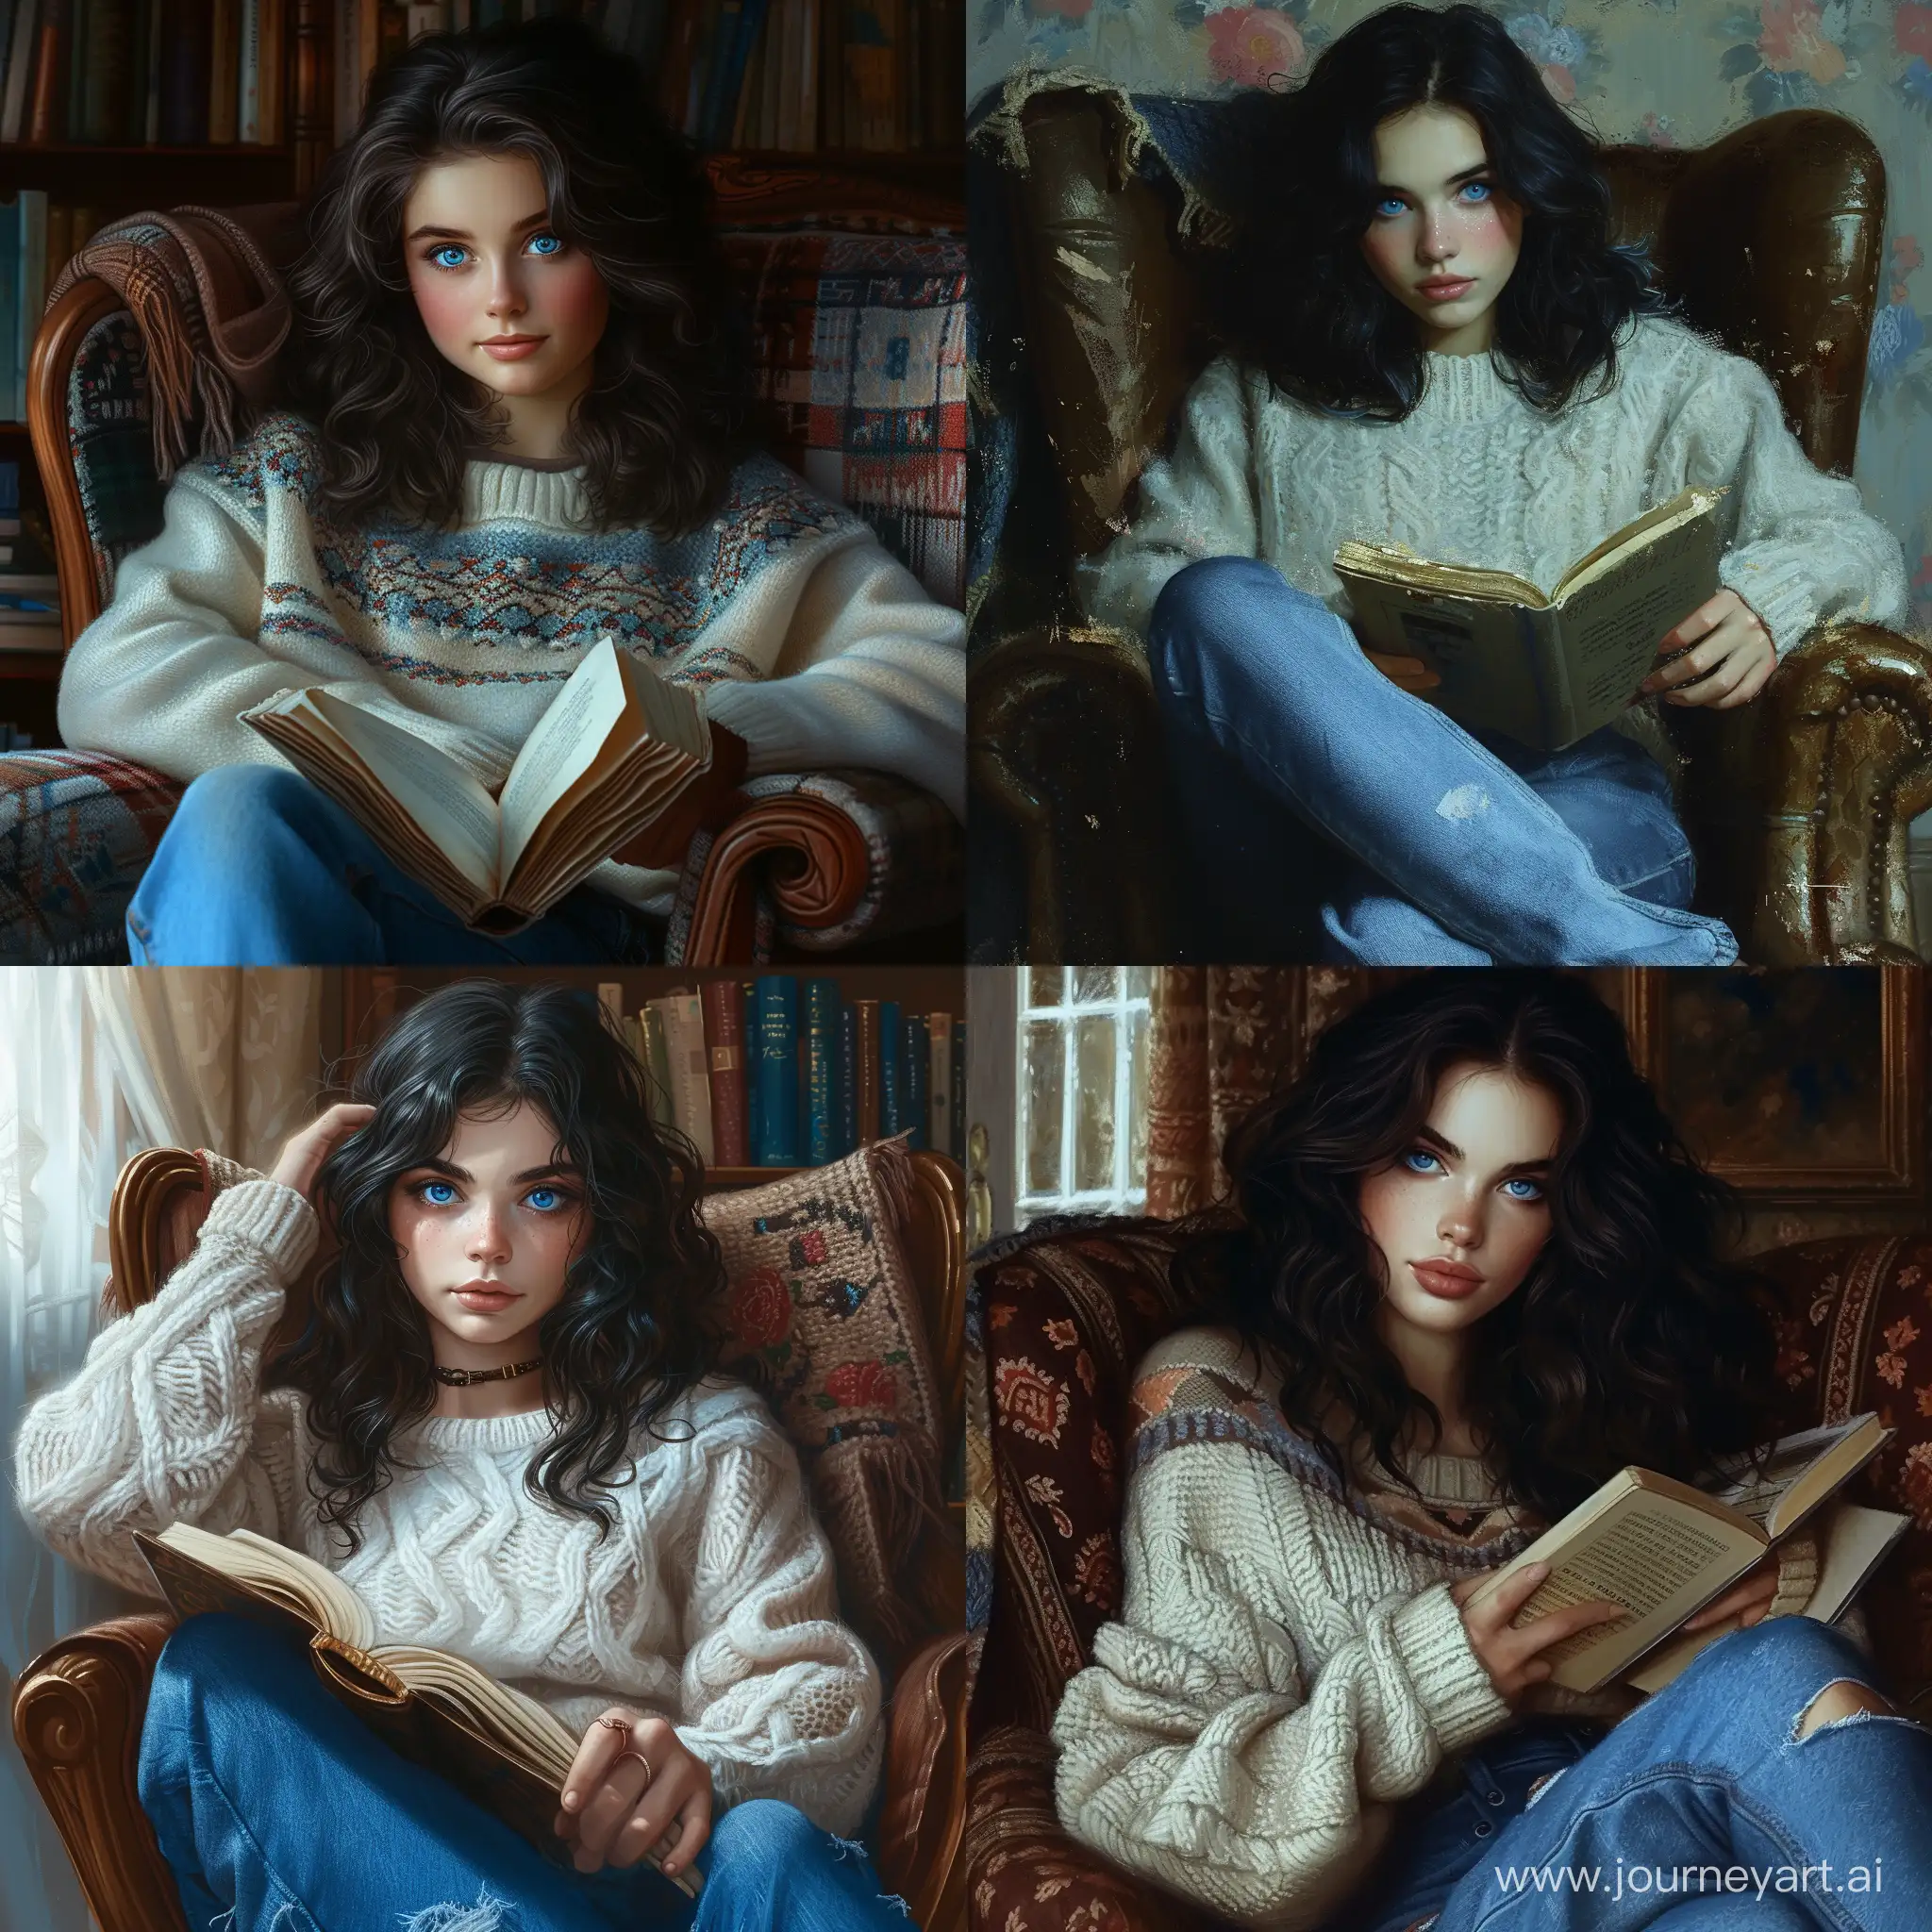 Captivating-1980s-Style-Portrait-Enchanting-Teen-with-Book-in-Hand